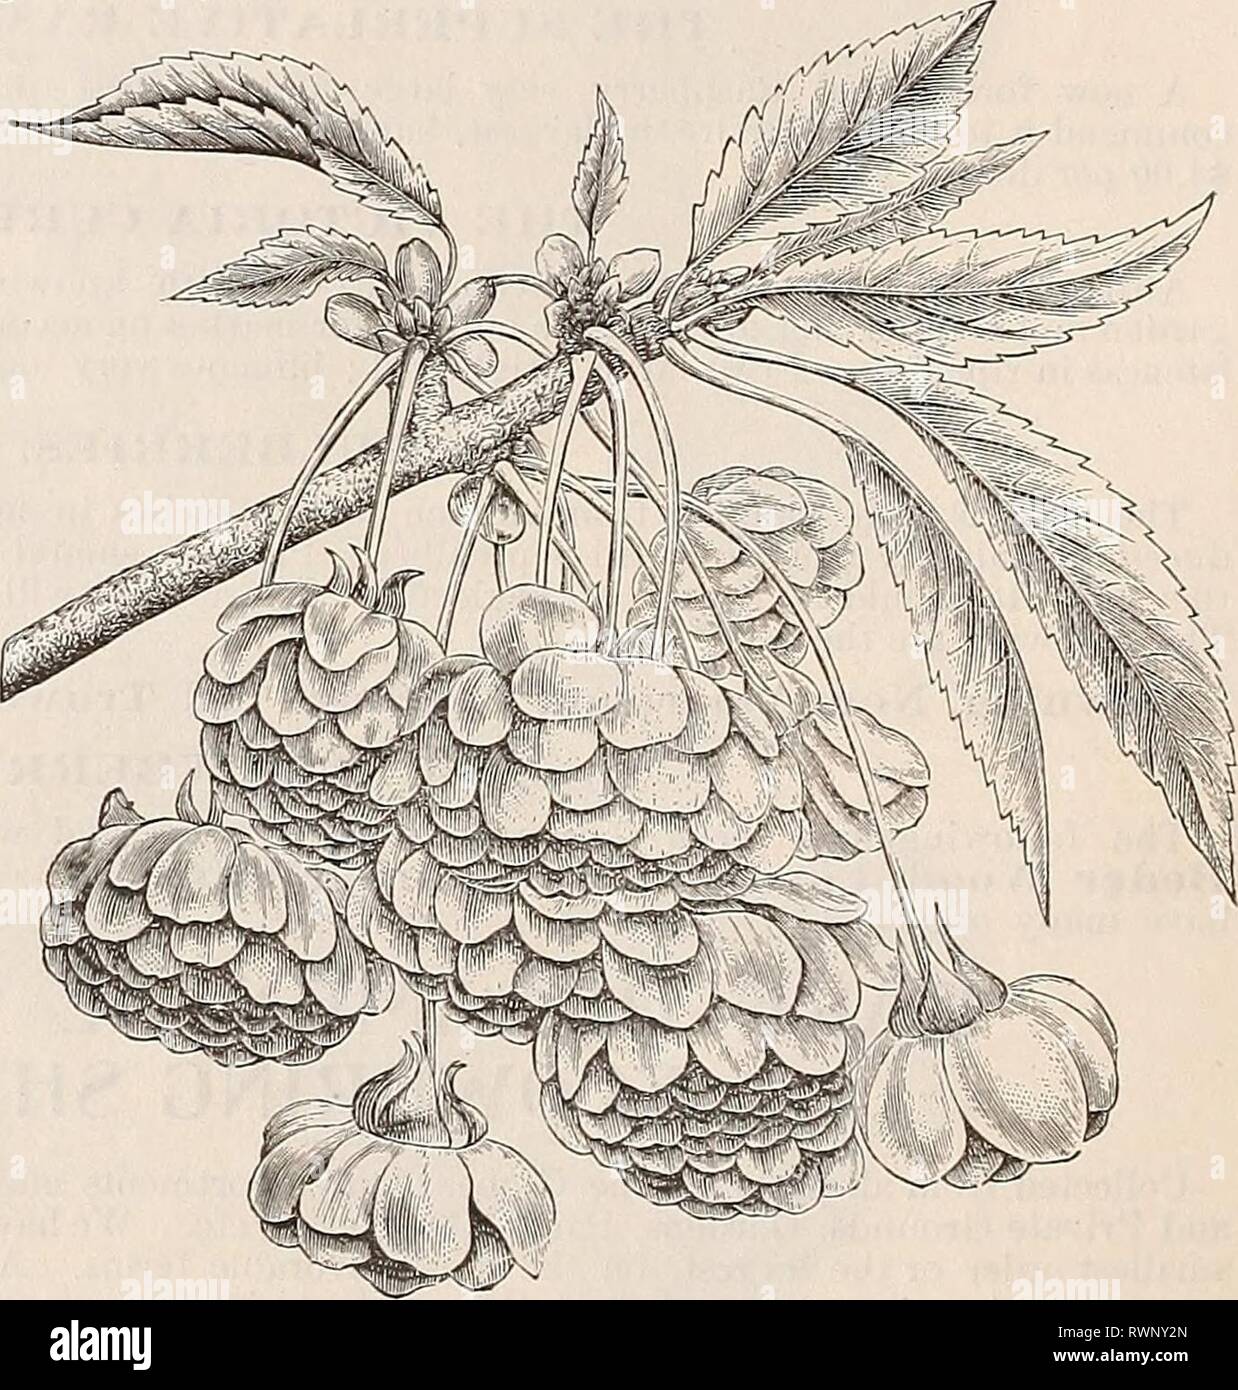 [Ellwanger & Barry's general catalogue] [Ellwanger & Barry's general catalogue] ellwangerbarrysg1896moun Year: 1896  LEAVES OF .JAP.N MAPLE —i NATURAL SIZE. habit, the foliage of the second growth is of a of the older foliage, produces a charming effect RED-FLOWERED HORSE CHESTNUT. One of the finest trees in cultivation ; form round, flowers showy red; blooms a little later than the white, and the leaves are of a deeper green. One of the most valuable ornamental trees. $1.00. CUT-LEAVED WEEPING BIRCH. Beyond question one of the most popular of all weeping or pendulous trees. Its tall, slender Stock Photo